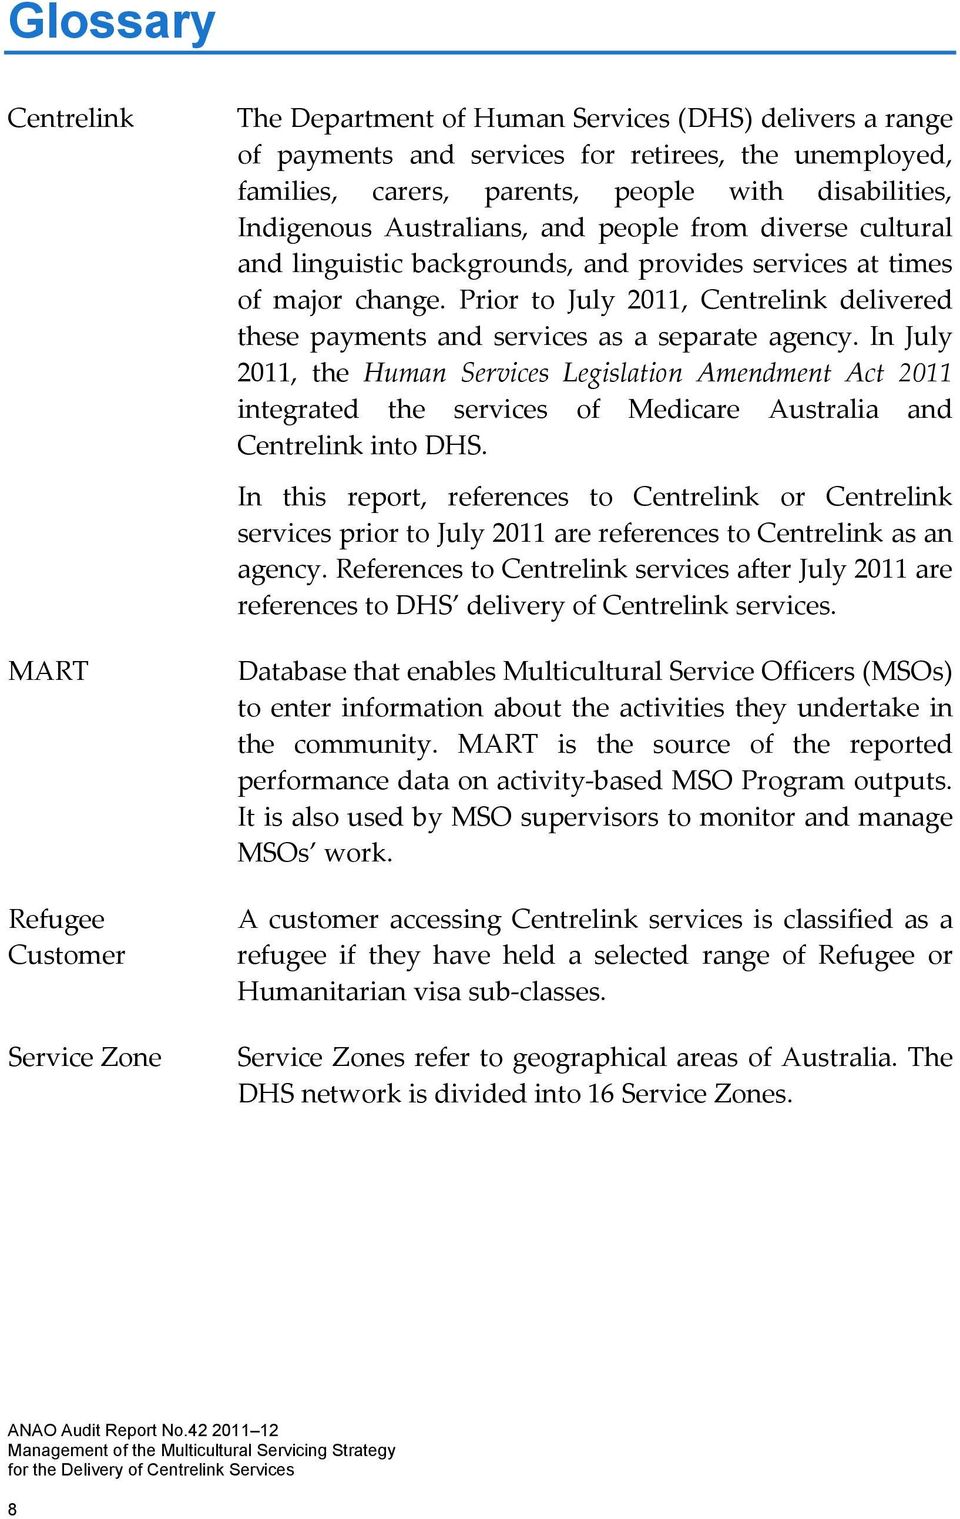 Prior to July 2011, Centrelink delivered these payments and services as a separate agency.